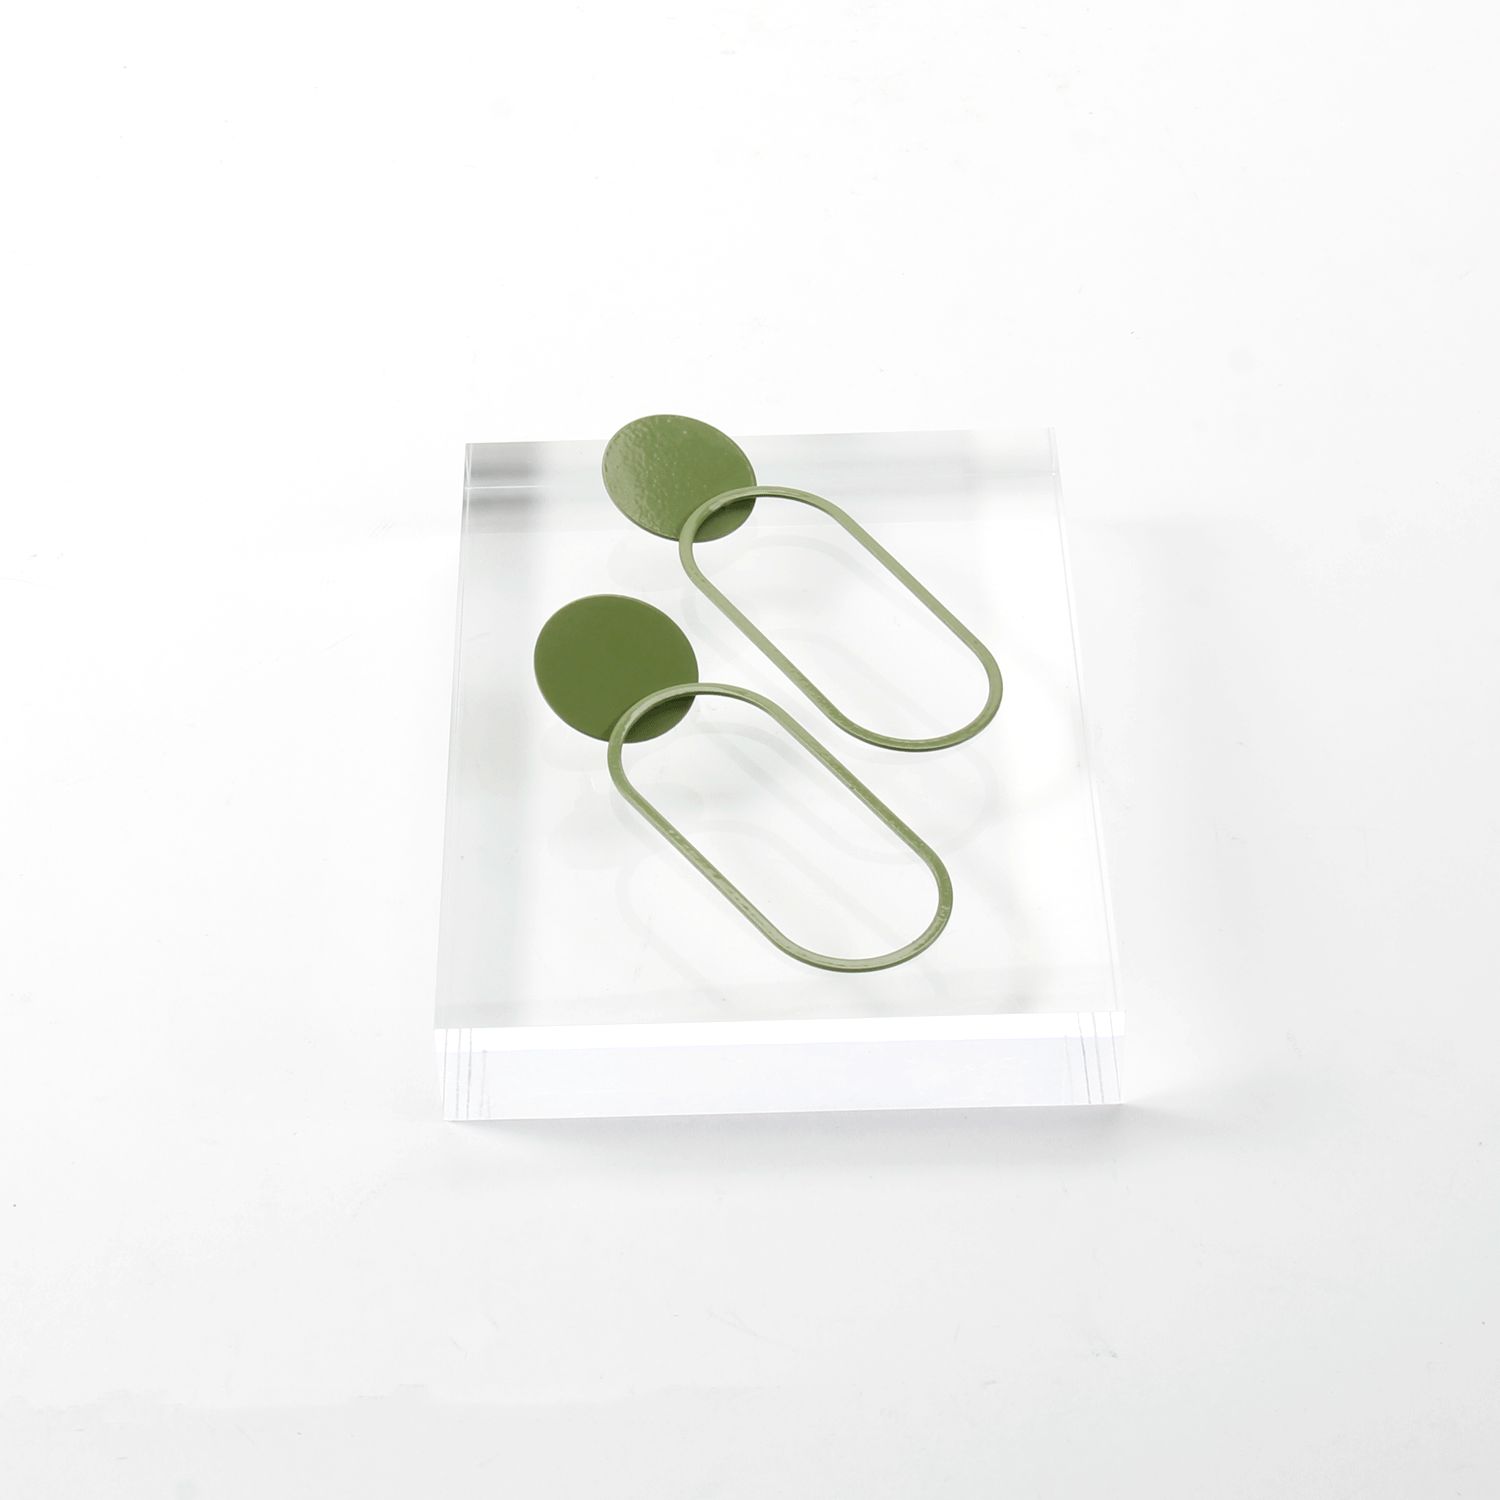 Days of August: Monaco Earrings in Avo Green Product Image 2 of 2